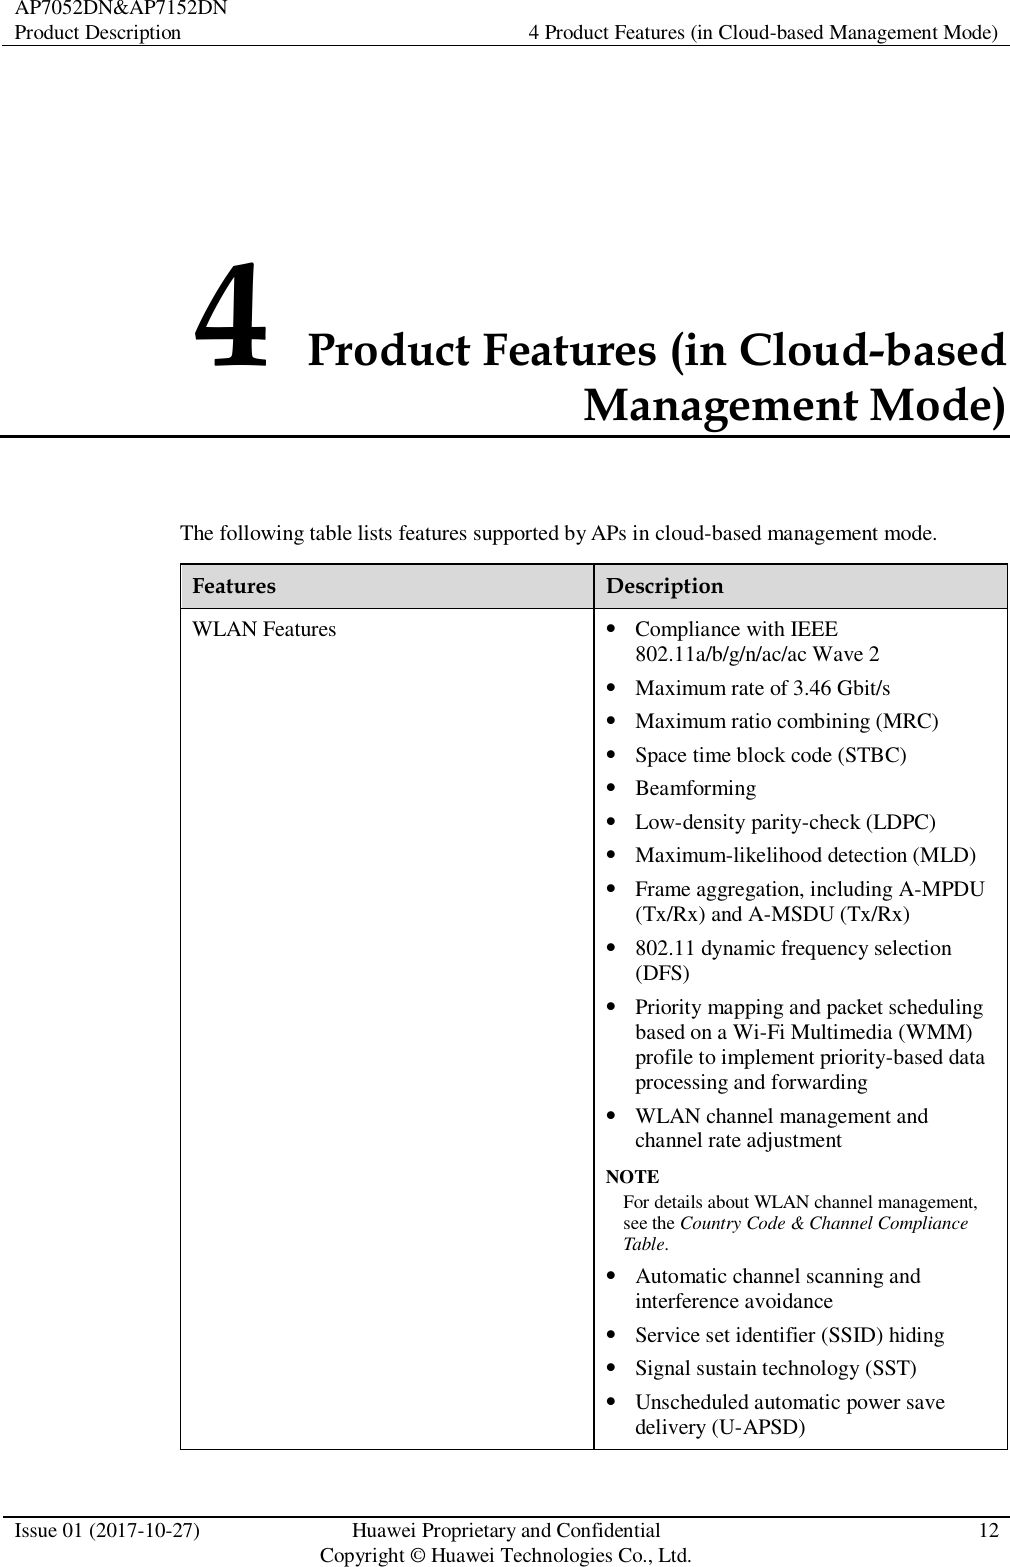 AP7052DN&amp;AP7152DN Product Description 4 Product Features (in Cloud-based Management Mode)  Issue 01 (2017-10-27) Huawei Proprietary and Confidential                                     Copyright © Huawei Technologies Co., Ltd. 12  4 Product Features (in Cloud-based Management Mode) The following table lists features supported by APs in cloud-based management mode. Features Description WLAN Features  Compliance with IEEE 802.11a/b/g/n/ac/ac Wave 2  Maximum rate of 3.46 Gbit/s  Maximum ratio combining (MRC)  Space time block code (STBC)  Beamforming  Low-density parity-check (LDPC)  Maximum-likelihood detection (MLD)  Frame aggregation, including A-MPDU (Tx/Rx) and A-MSDU (Tx/Rx)  802.11 dynamic frequency selection (DFS)  Priority mapping and packet scheduling based on a Wi-Fi Multimedia (WMM) profile to implement priority-based data processing and forwarding  WLAN channel management and channel rate adjustment NOTE For details about WLAN channel management, see the Country Code &amp; Channel Compliance Table.  Automatic channel scanning and interference avoidance  Service set identifier (SSID) hiding  Signal sustain technology (SST)  Unscheduled automatic power save delivery (U-APSD) 